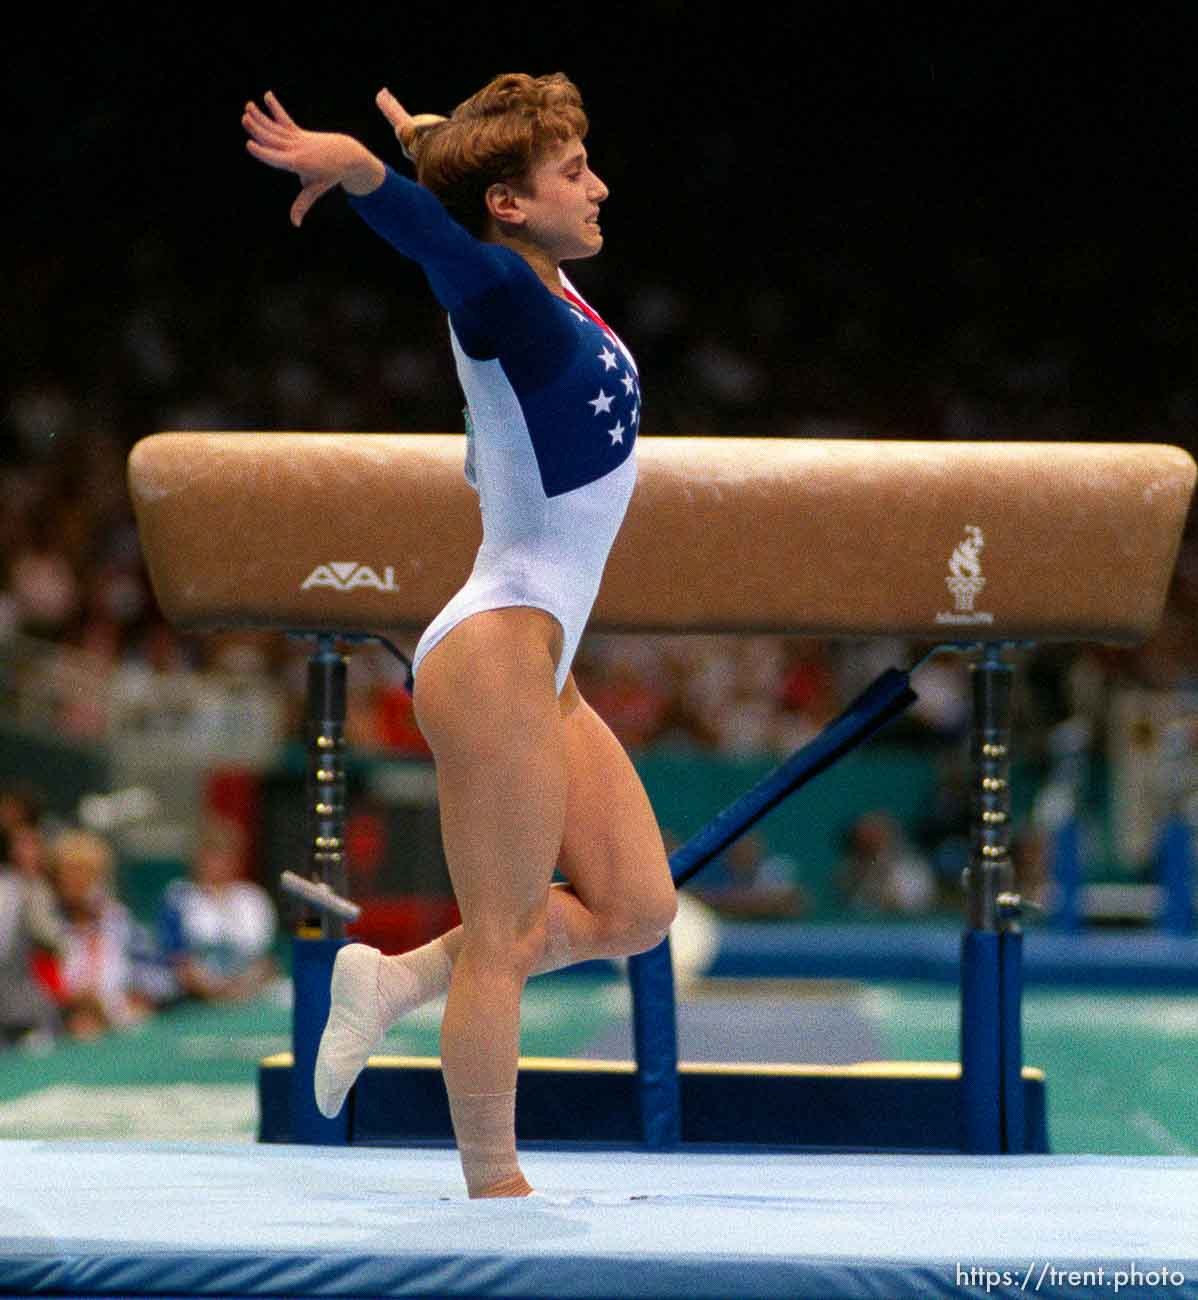 Kerri Strug's heroic vault on injured foot to secure gold medal for US team at Womens Team Gymnastics at the 1996 Summer Olympic Games